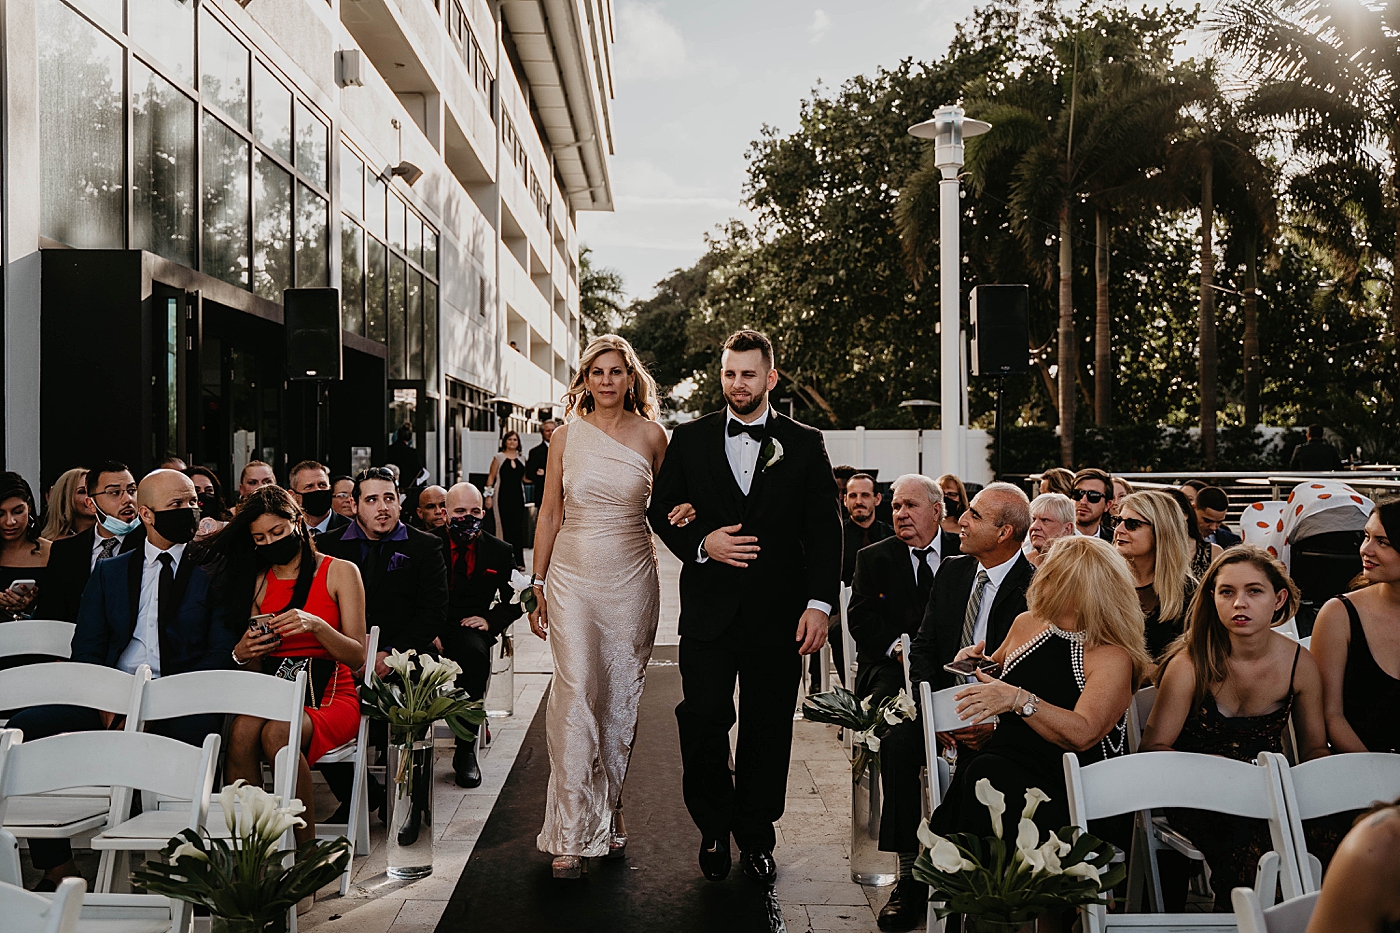 Ceremony Family and Bridal party going down the aisle Waterstone Resort and Marina Wedding captured by South Florida Wedding Photographer Krystal Capone Photography